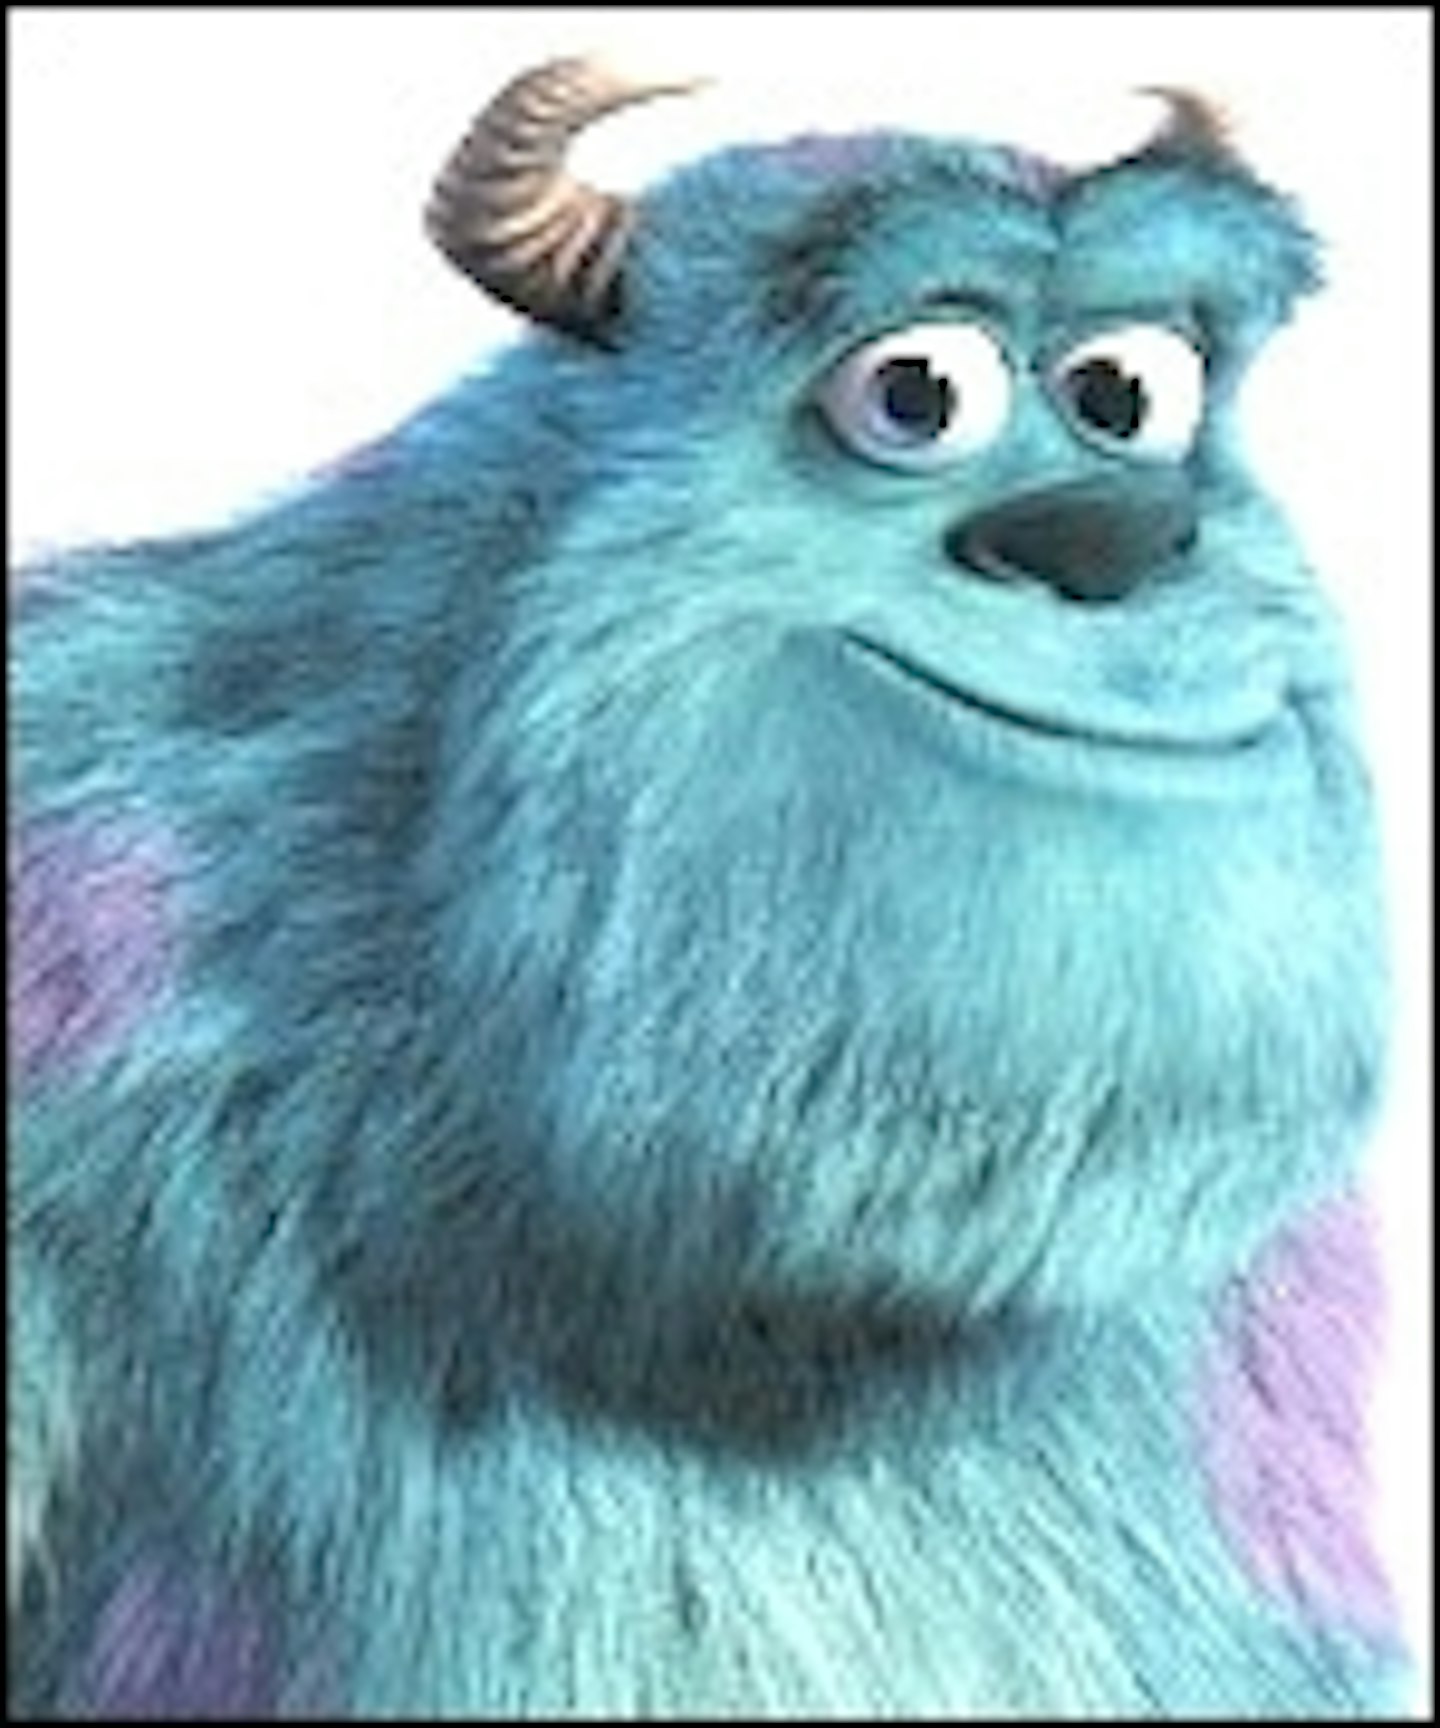 Monsters, Inc. 2 Arrives In 2012